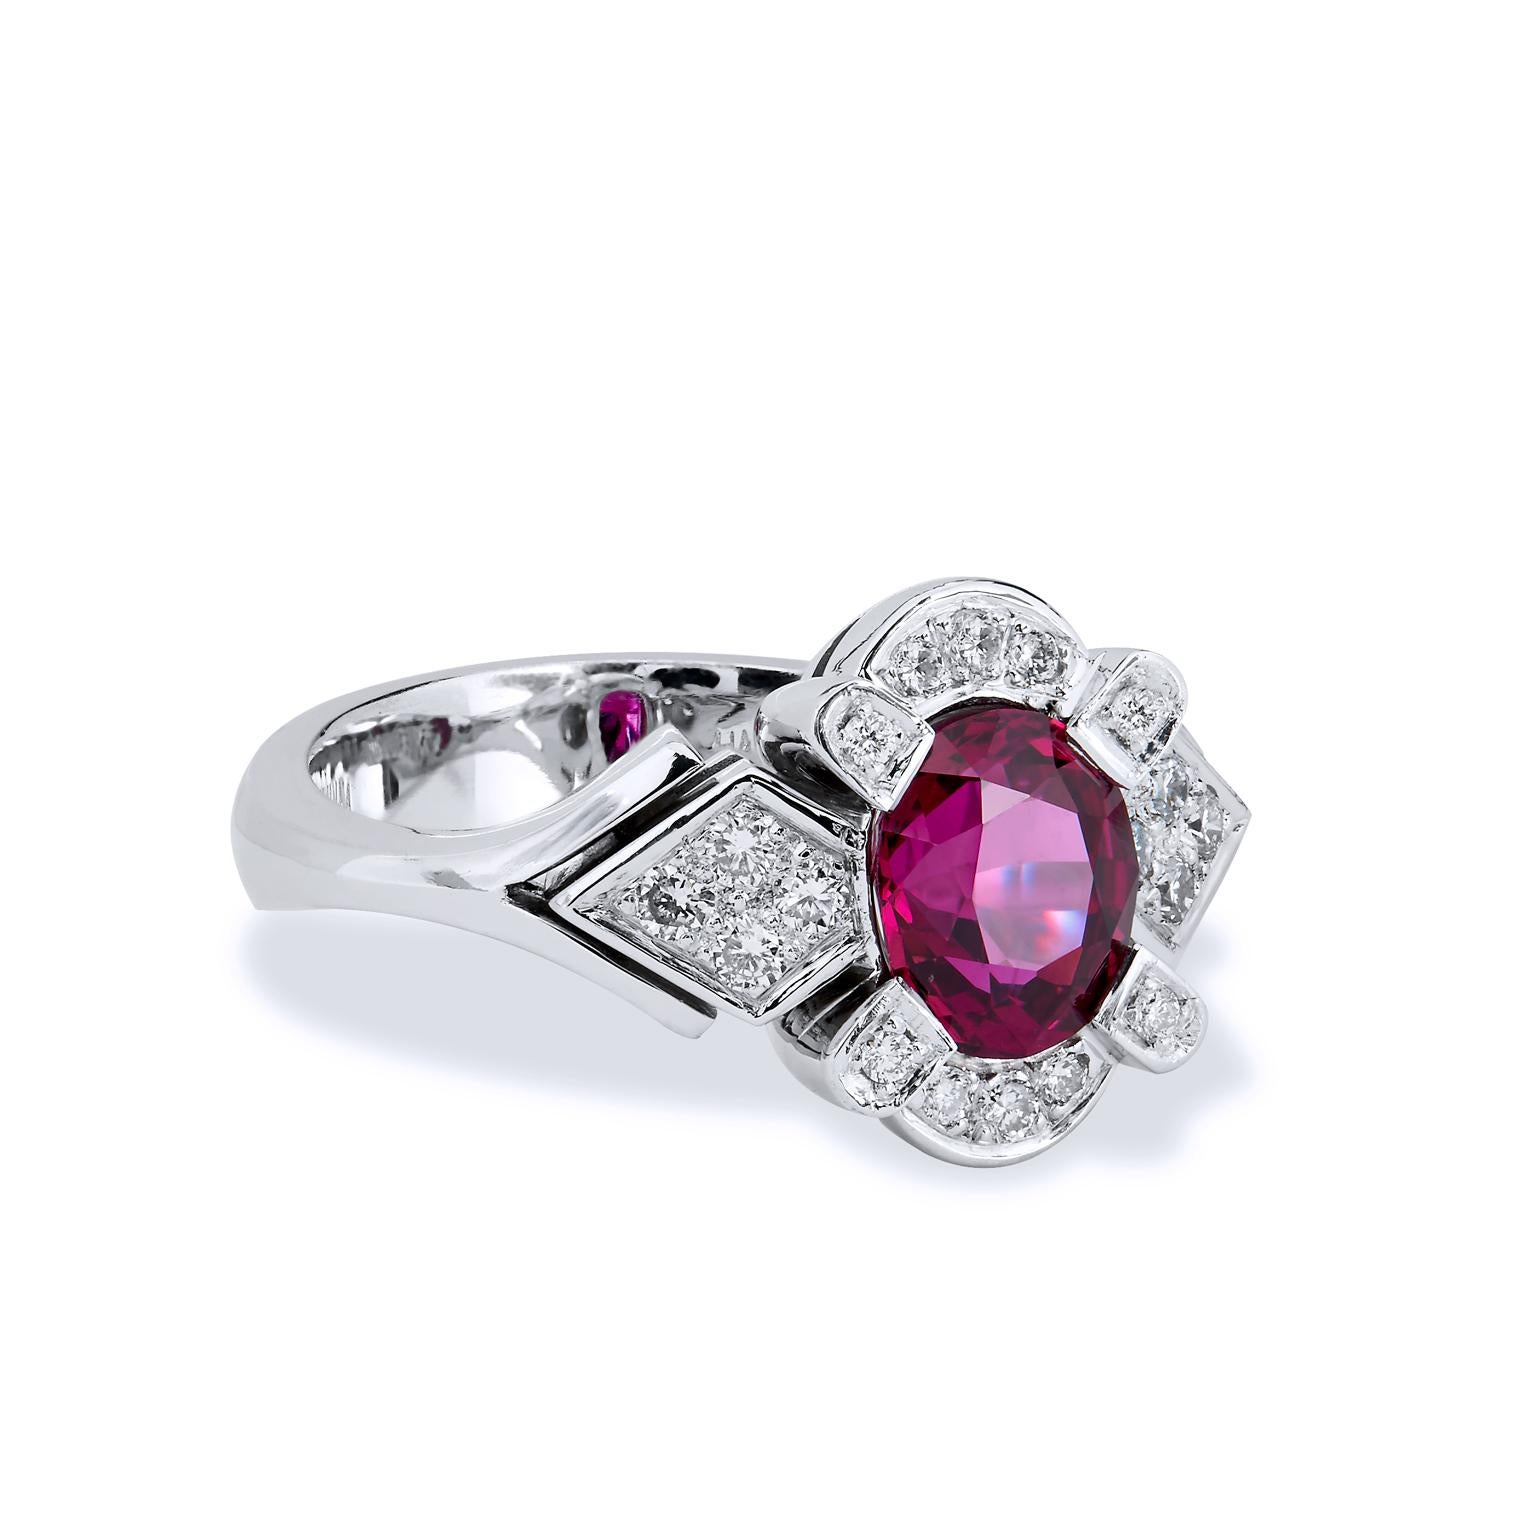 Marvel at this gorgeous Thai Oval Ruby Diamond Pave Platinum Ring! The spectacular, Fine Thai Oval Ruby is nestled in the center of diamond pave which perfectly accents the piece. Handcrafted with unparalleled skill, it's a treasure!

Thai Oval Ruby